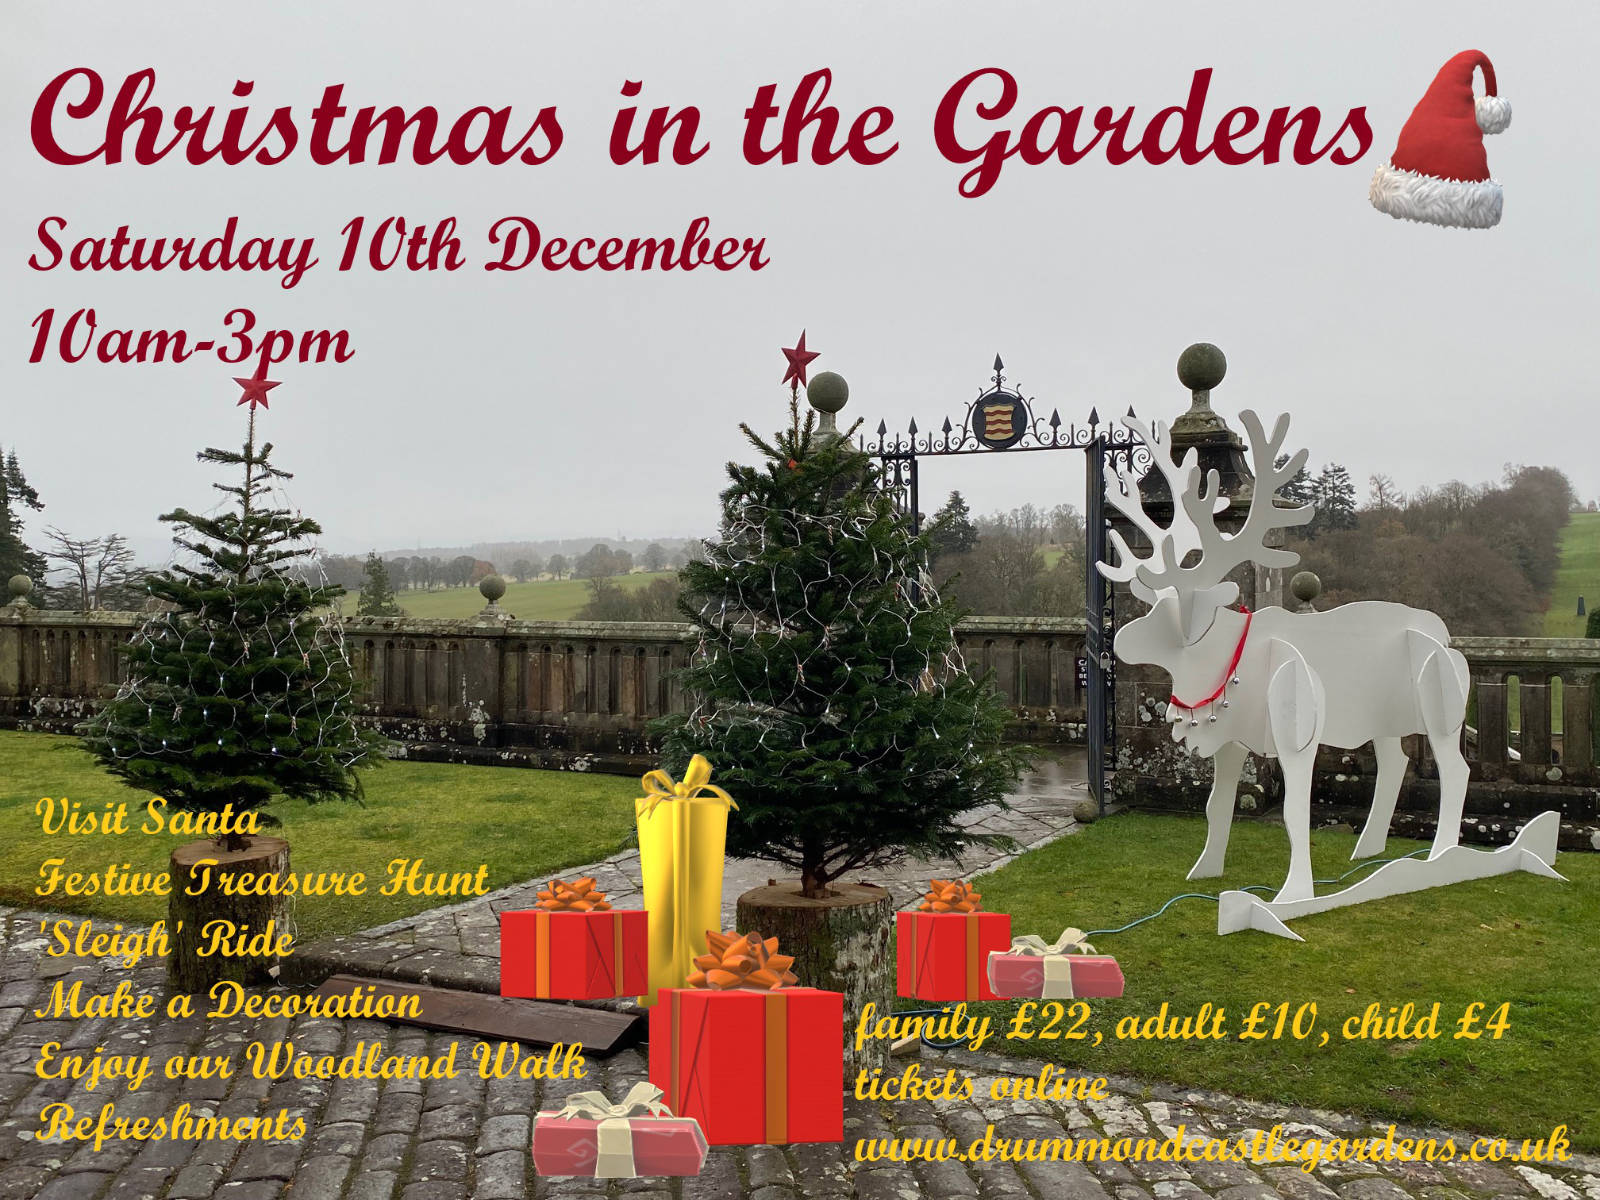 Join us for Christmas in the Gardens on Saturday 10th December from 10am-3pm